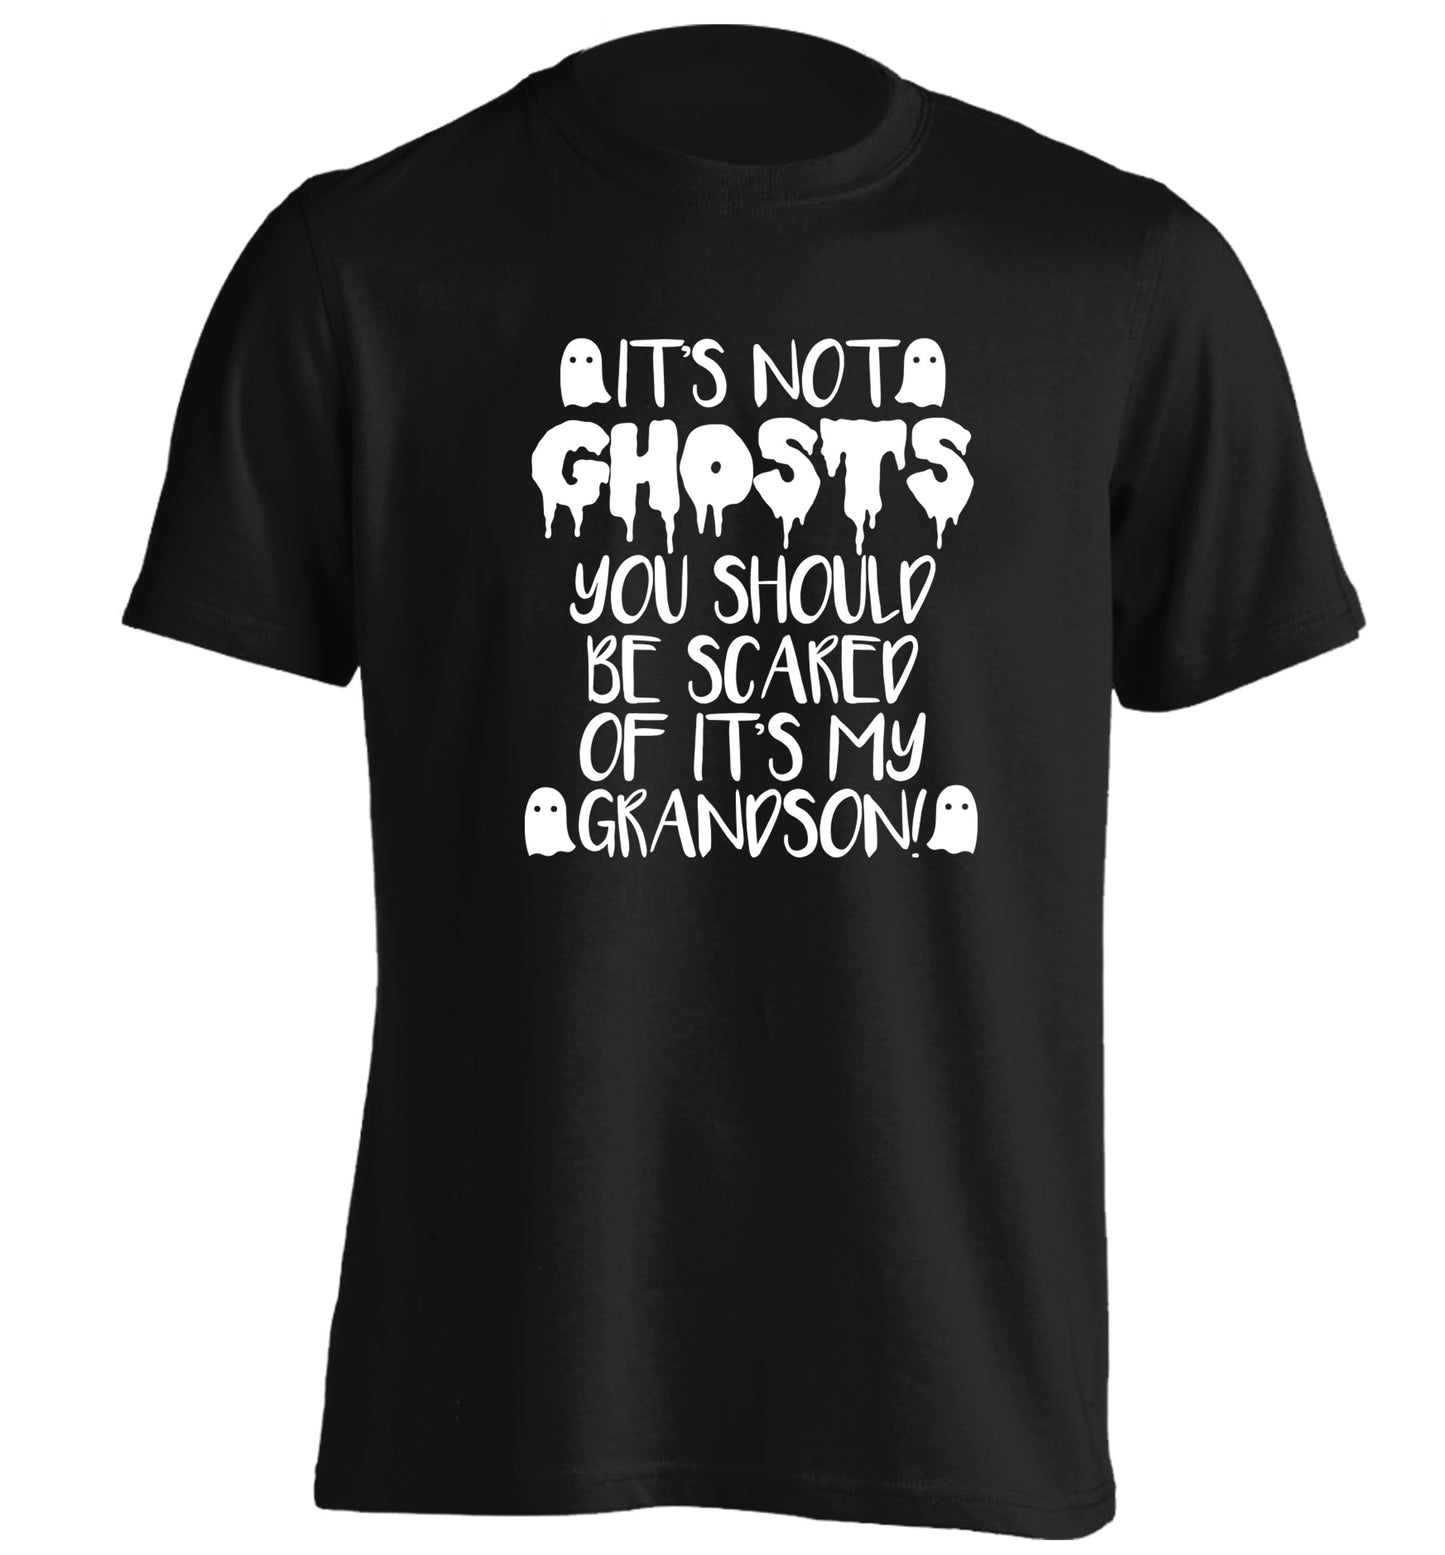 It's not ghosts you should be scared of it's my grandson! adults unisex black Tshirt 2XL